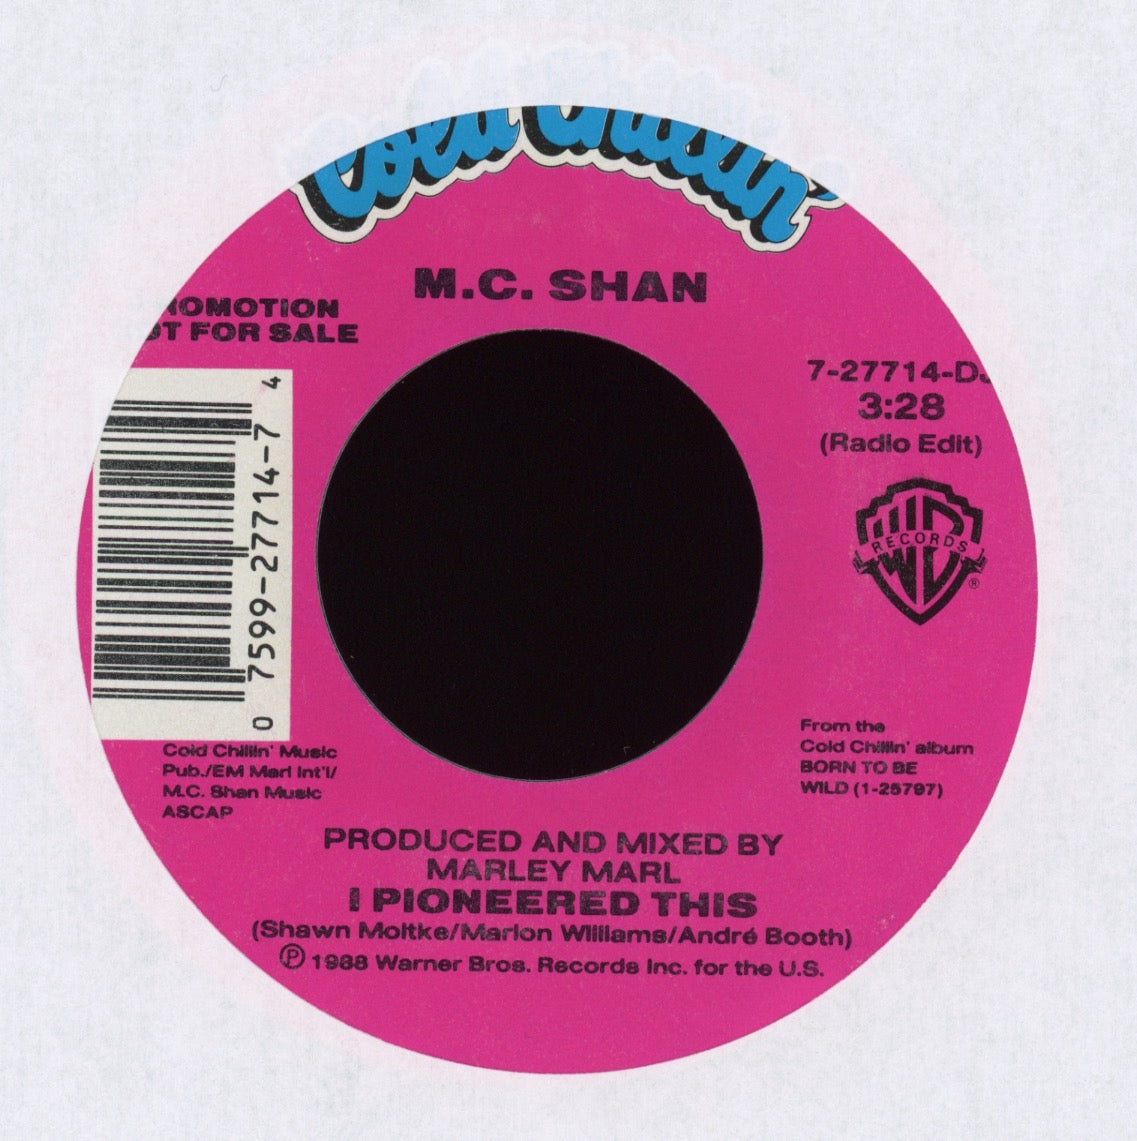 MC Shan - I Pioneered This on Cold Chillin' Promo